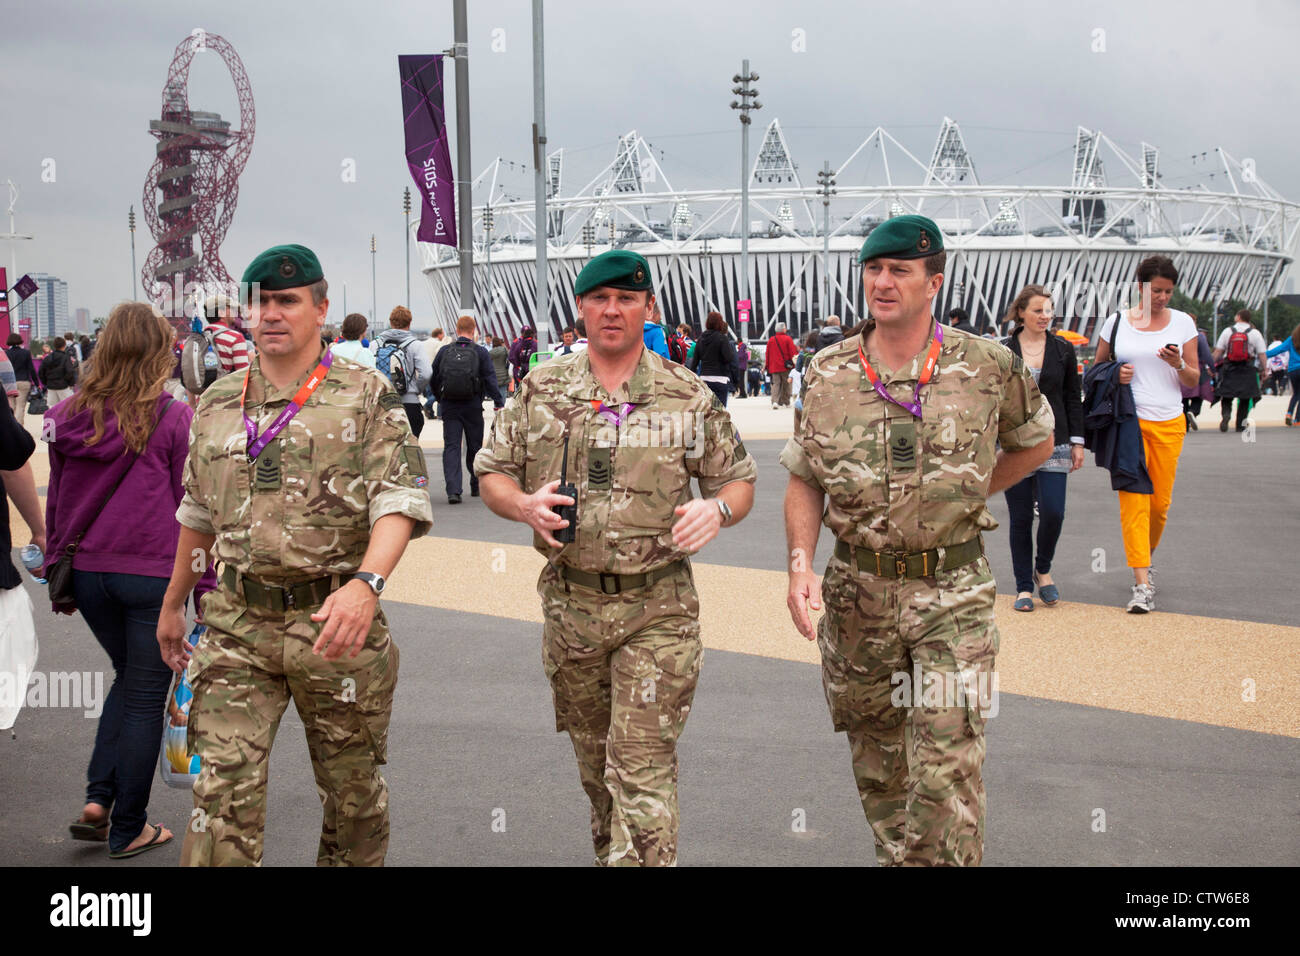 London 2012 Olympic Park in Stratford. British Army on duty after they were brought in to pick up the shortfall in security. Stock Photo